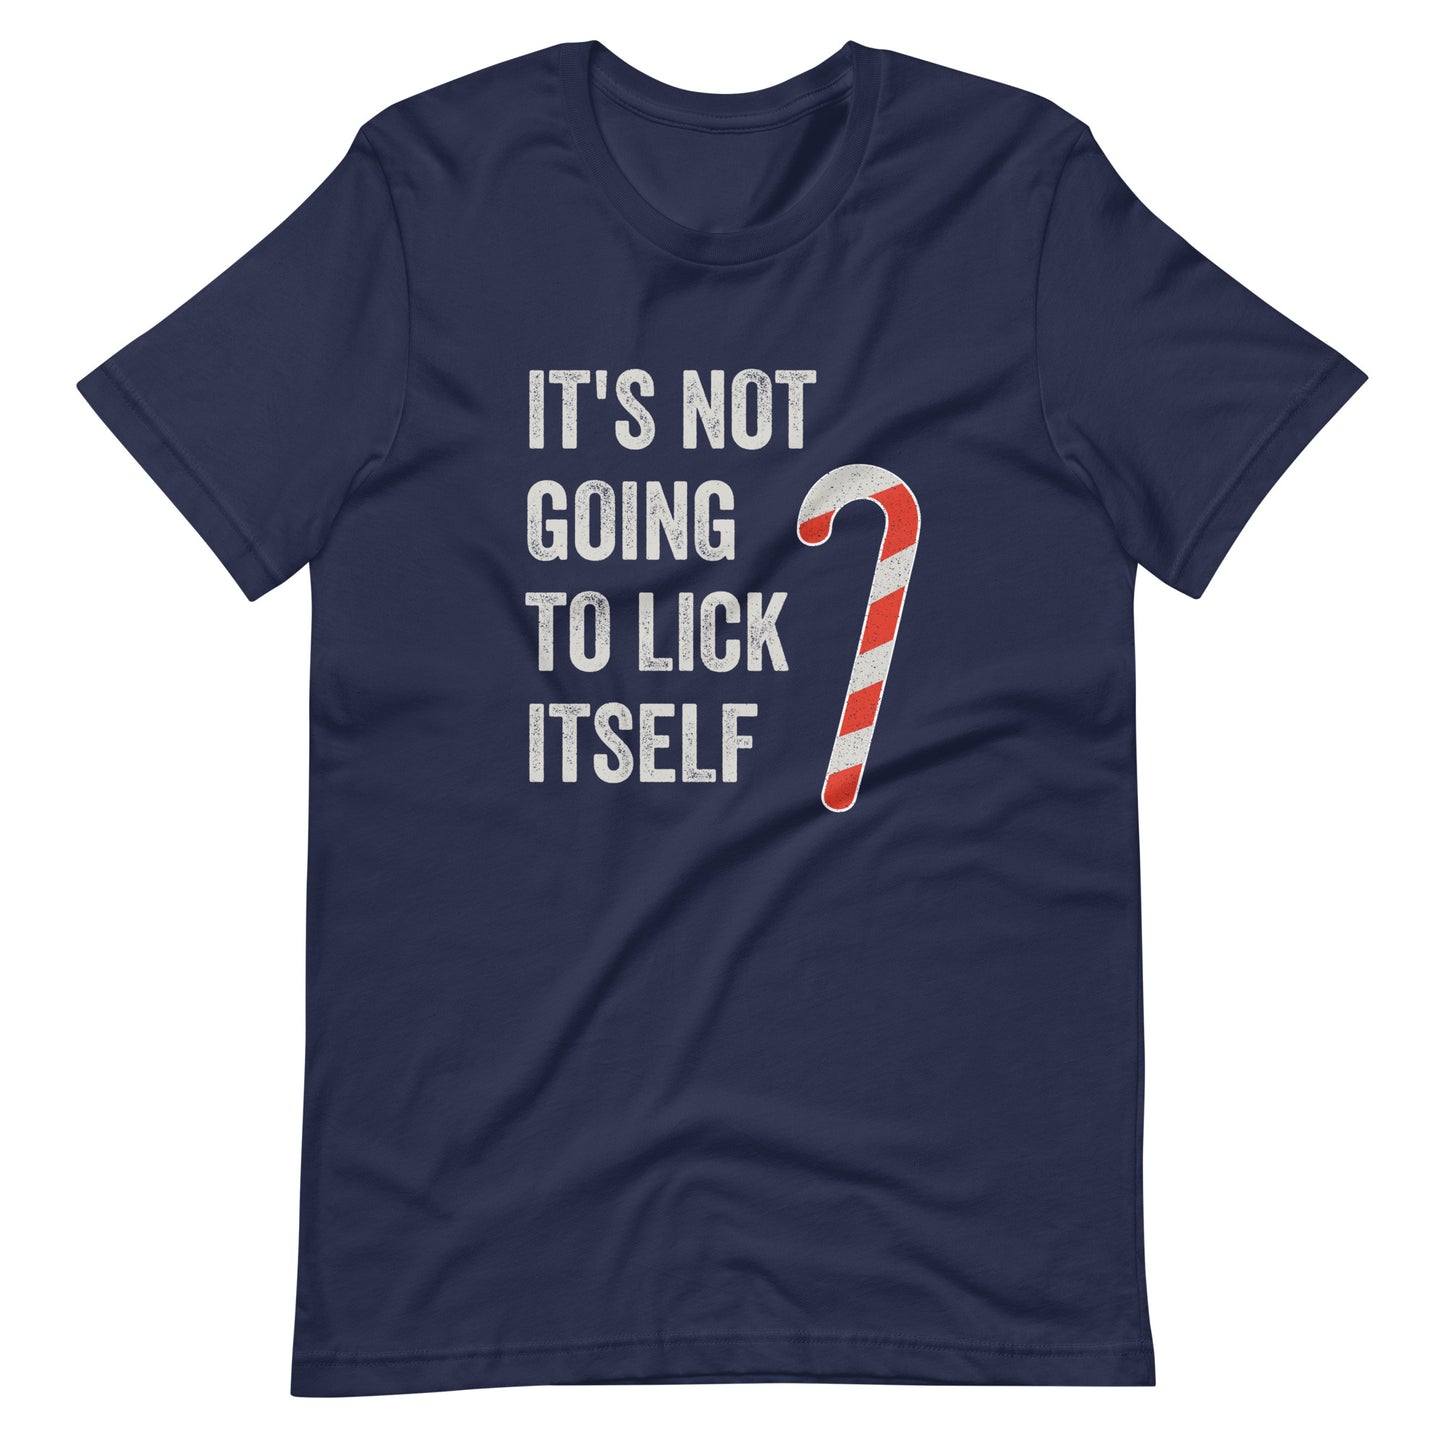 It's Not Going to Lick Itself, Funny Christmas, Candy Cane Humor Unisex Shirt